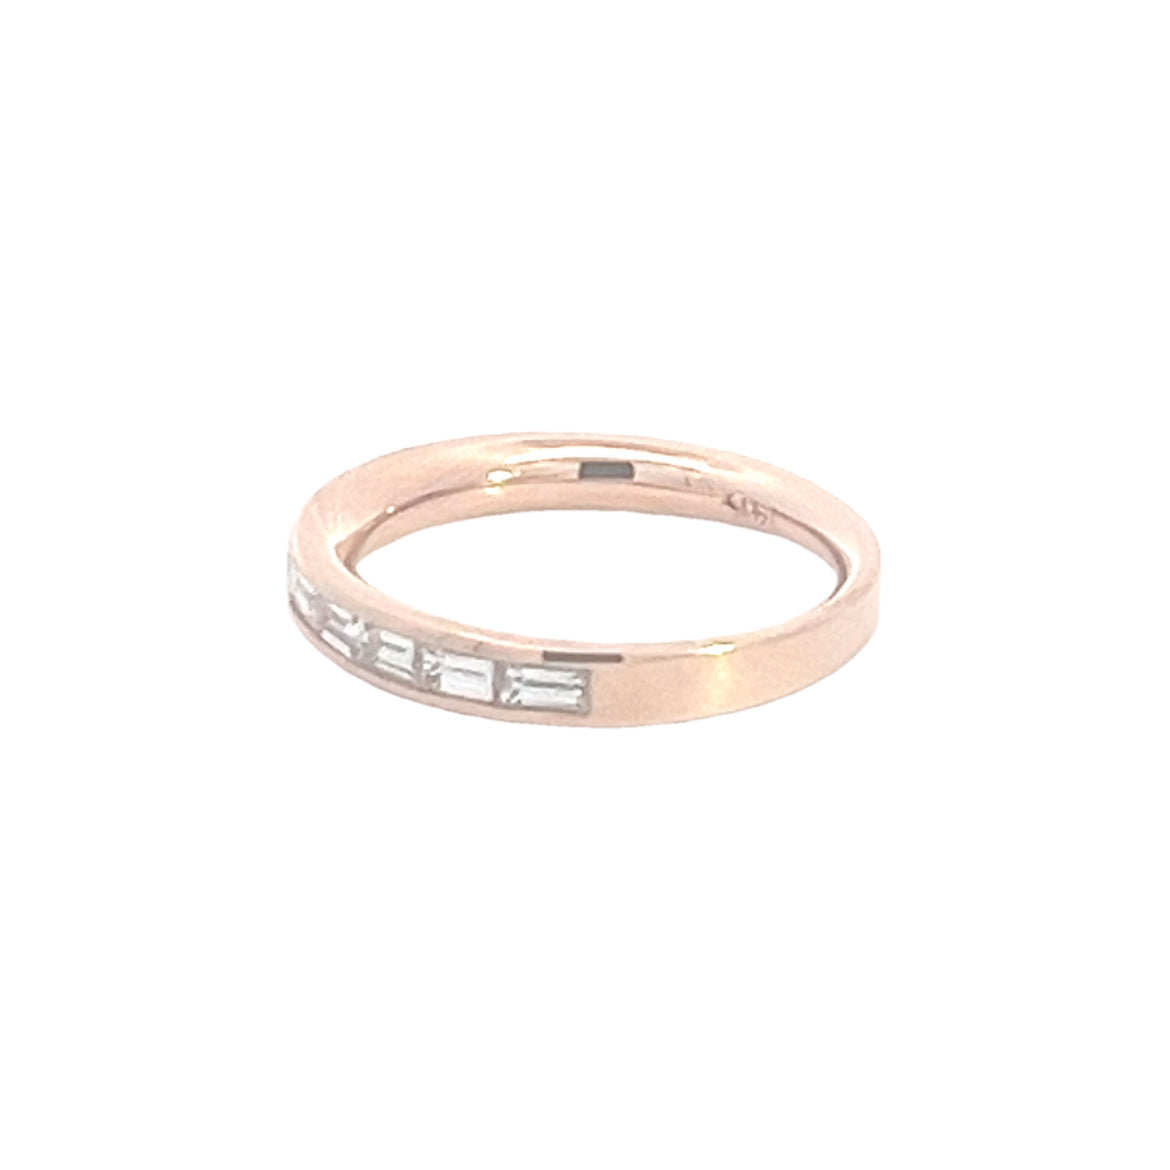 Rose gold baguette channel wedding band 1 ctw